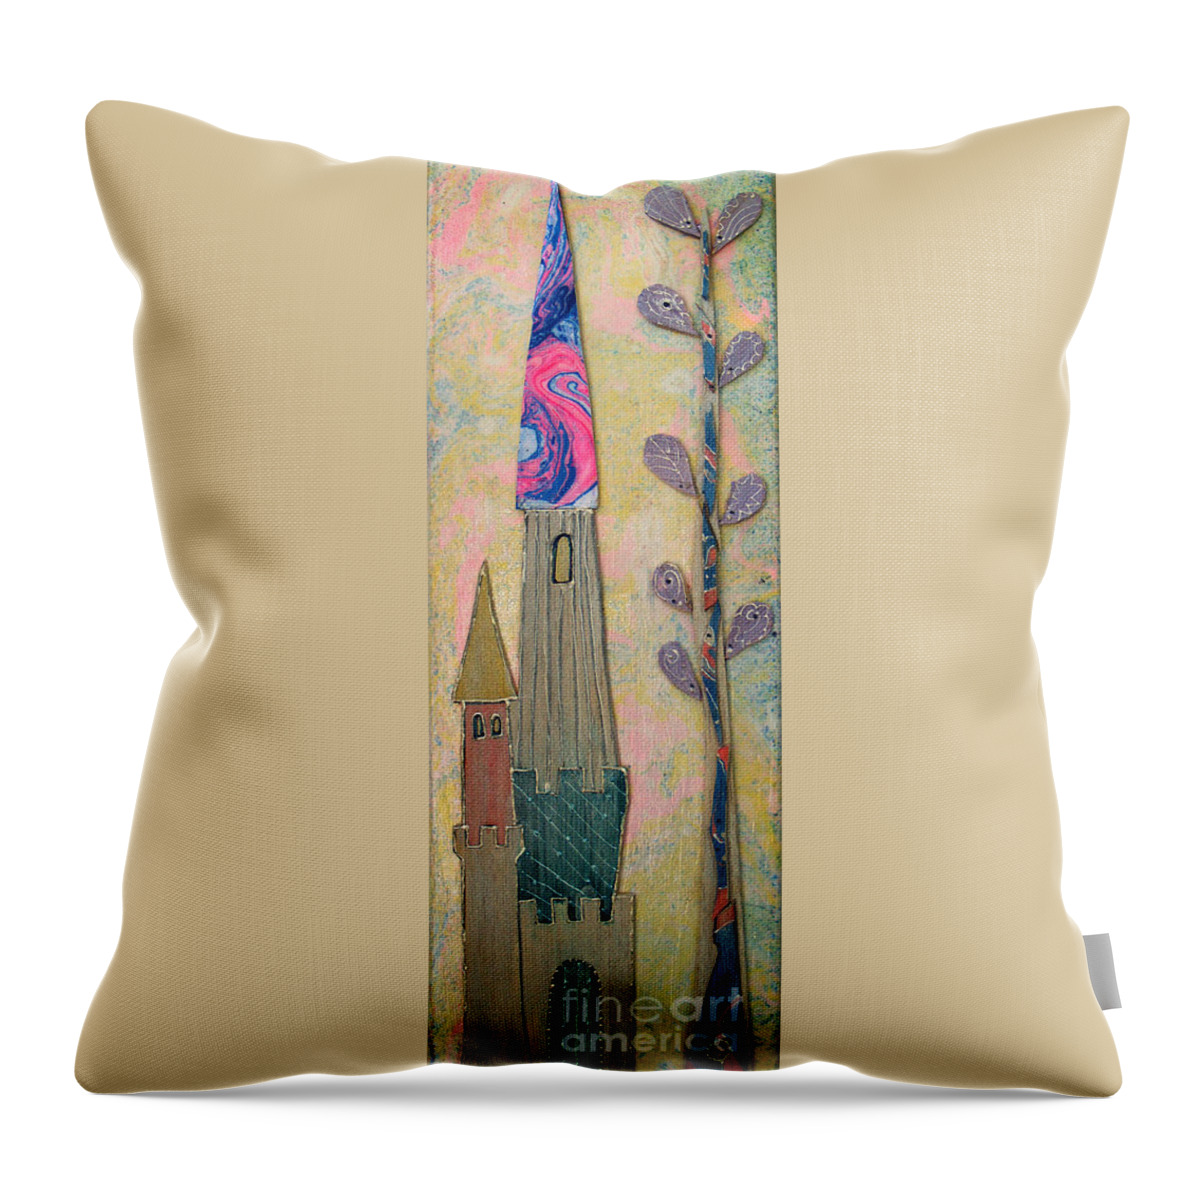 Castle Throw Pillow featuring the mixed media The castle gives it self away by Aqualia